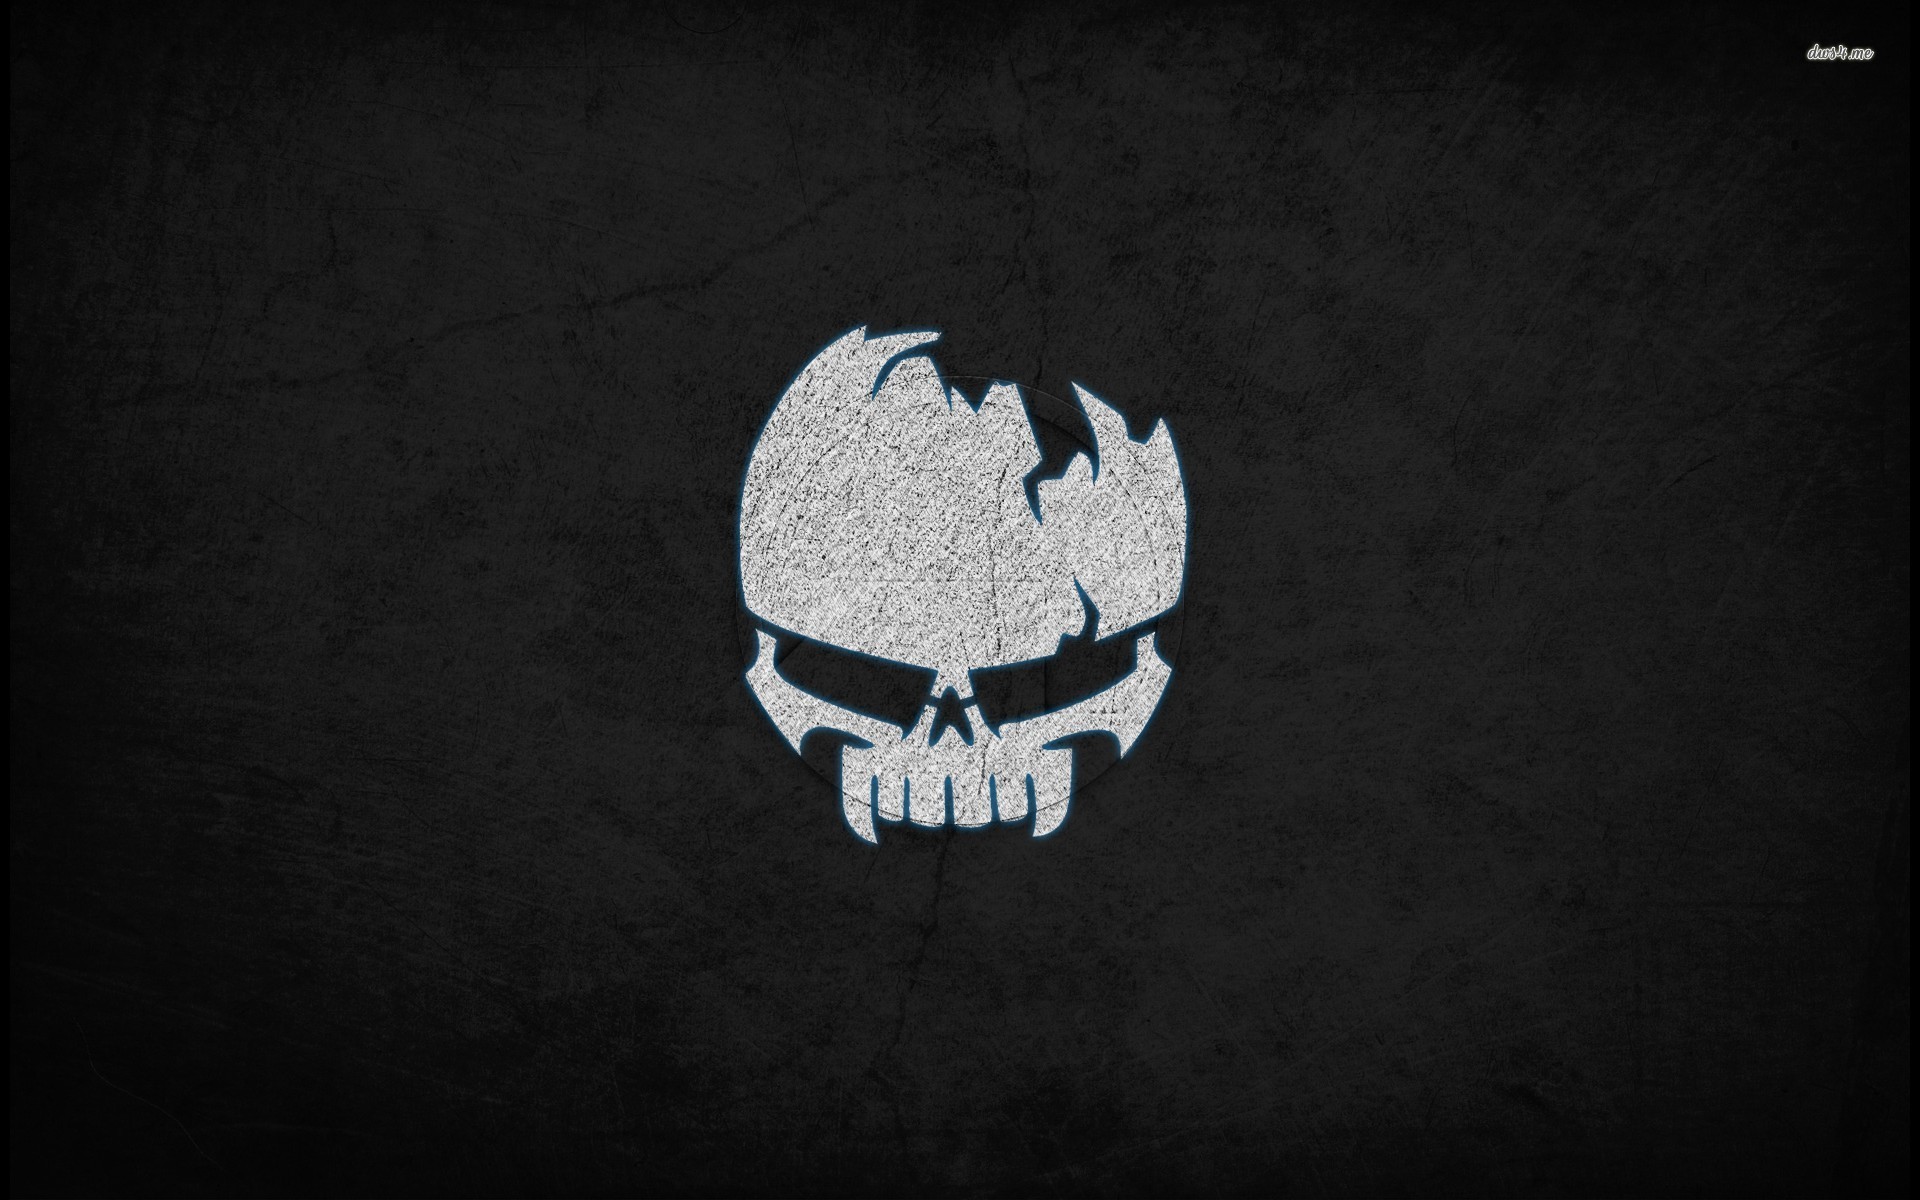 Skull Wallpapers High Quality Download Free HD Wallpapers Download Free Images Wallpaper [wallpaper981.blogspot.com]